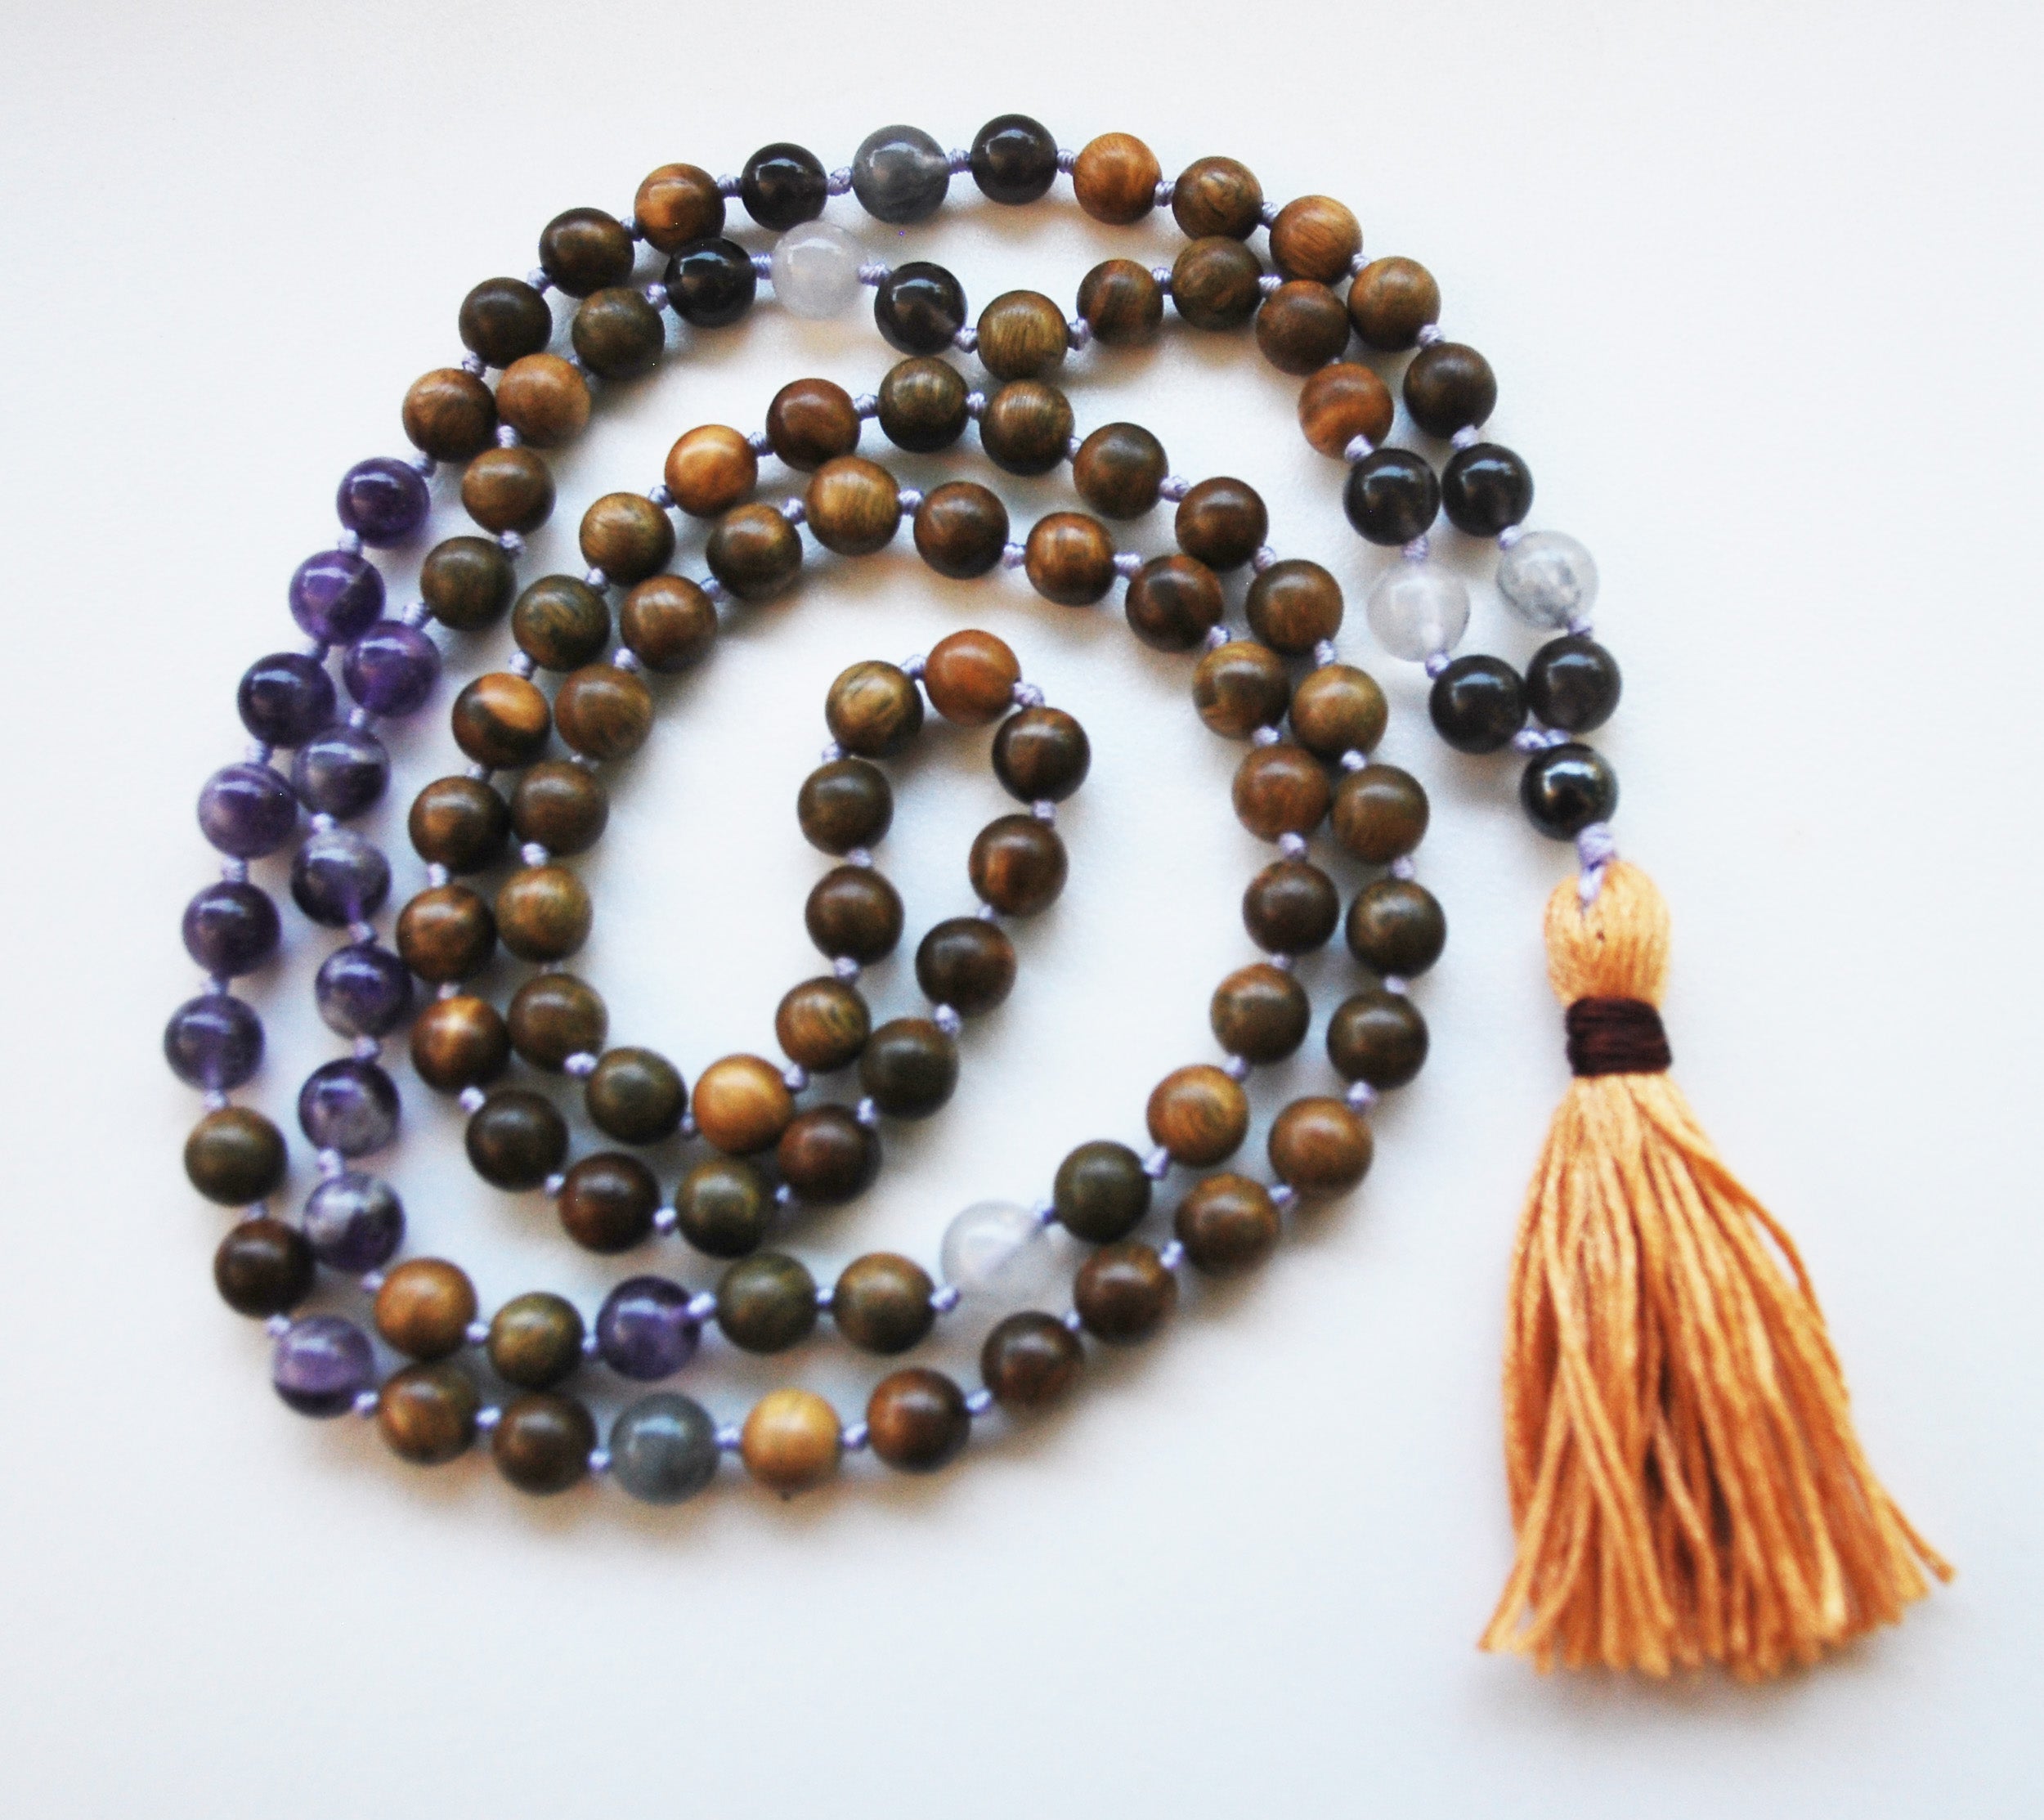 8mm Green Sandalwood & Amethyst 108 Knotted Mala Necklace with Cotton Tassel